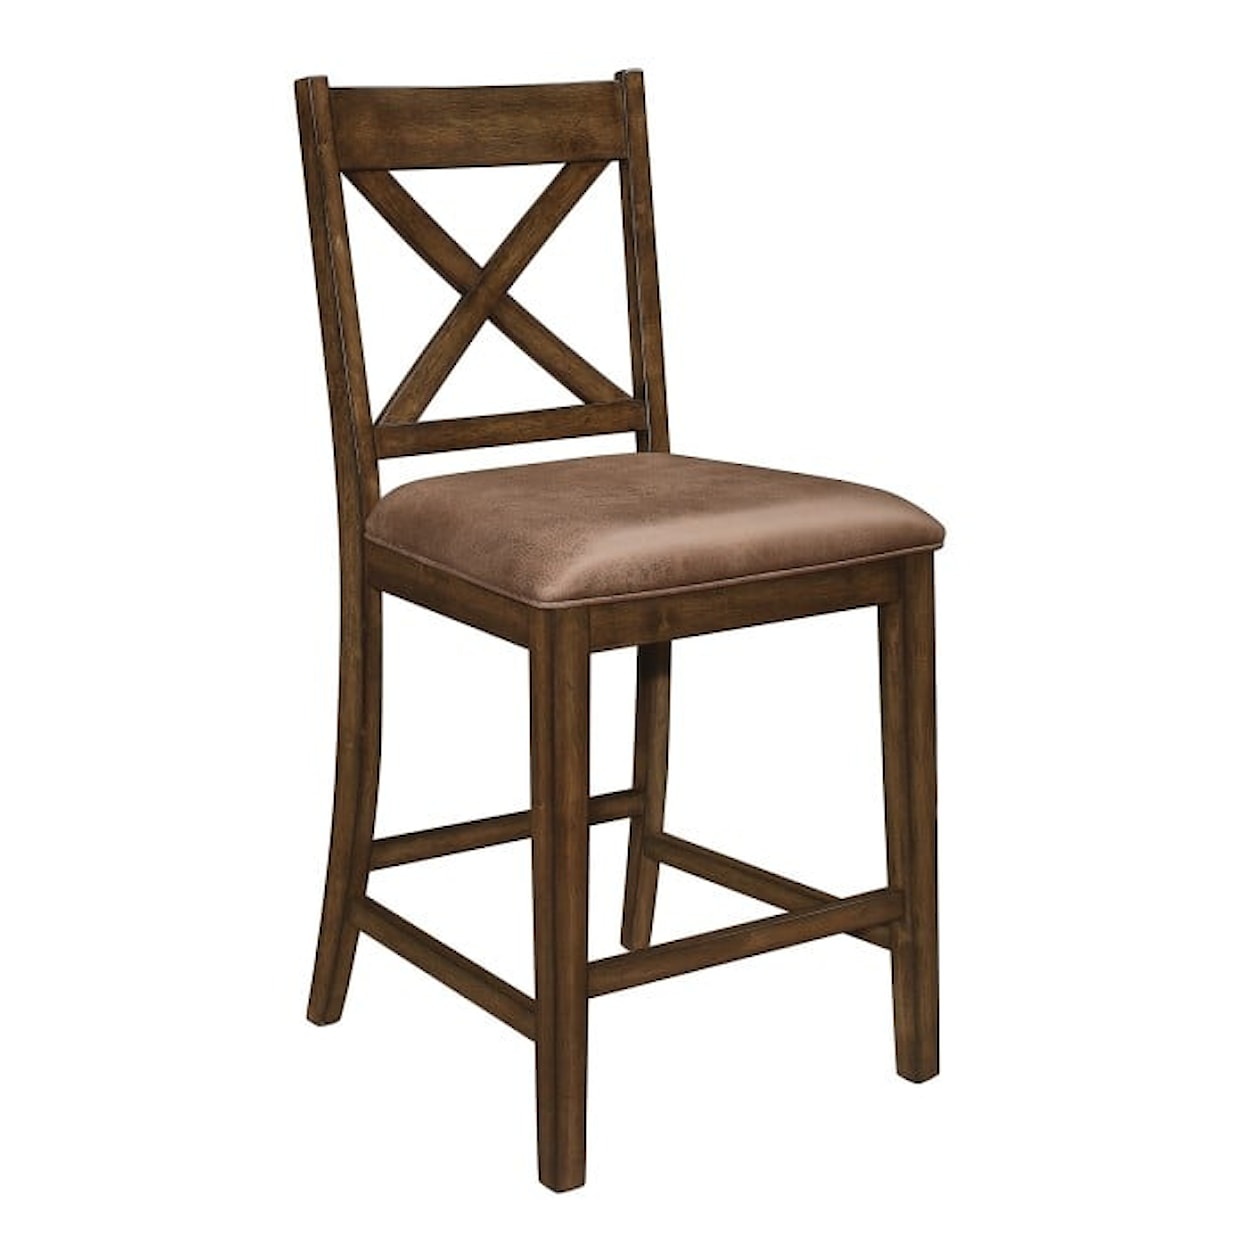 Homelegance Levittown Dining Chair